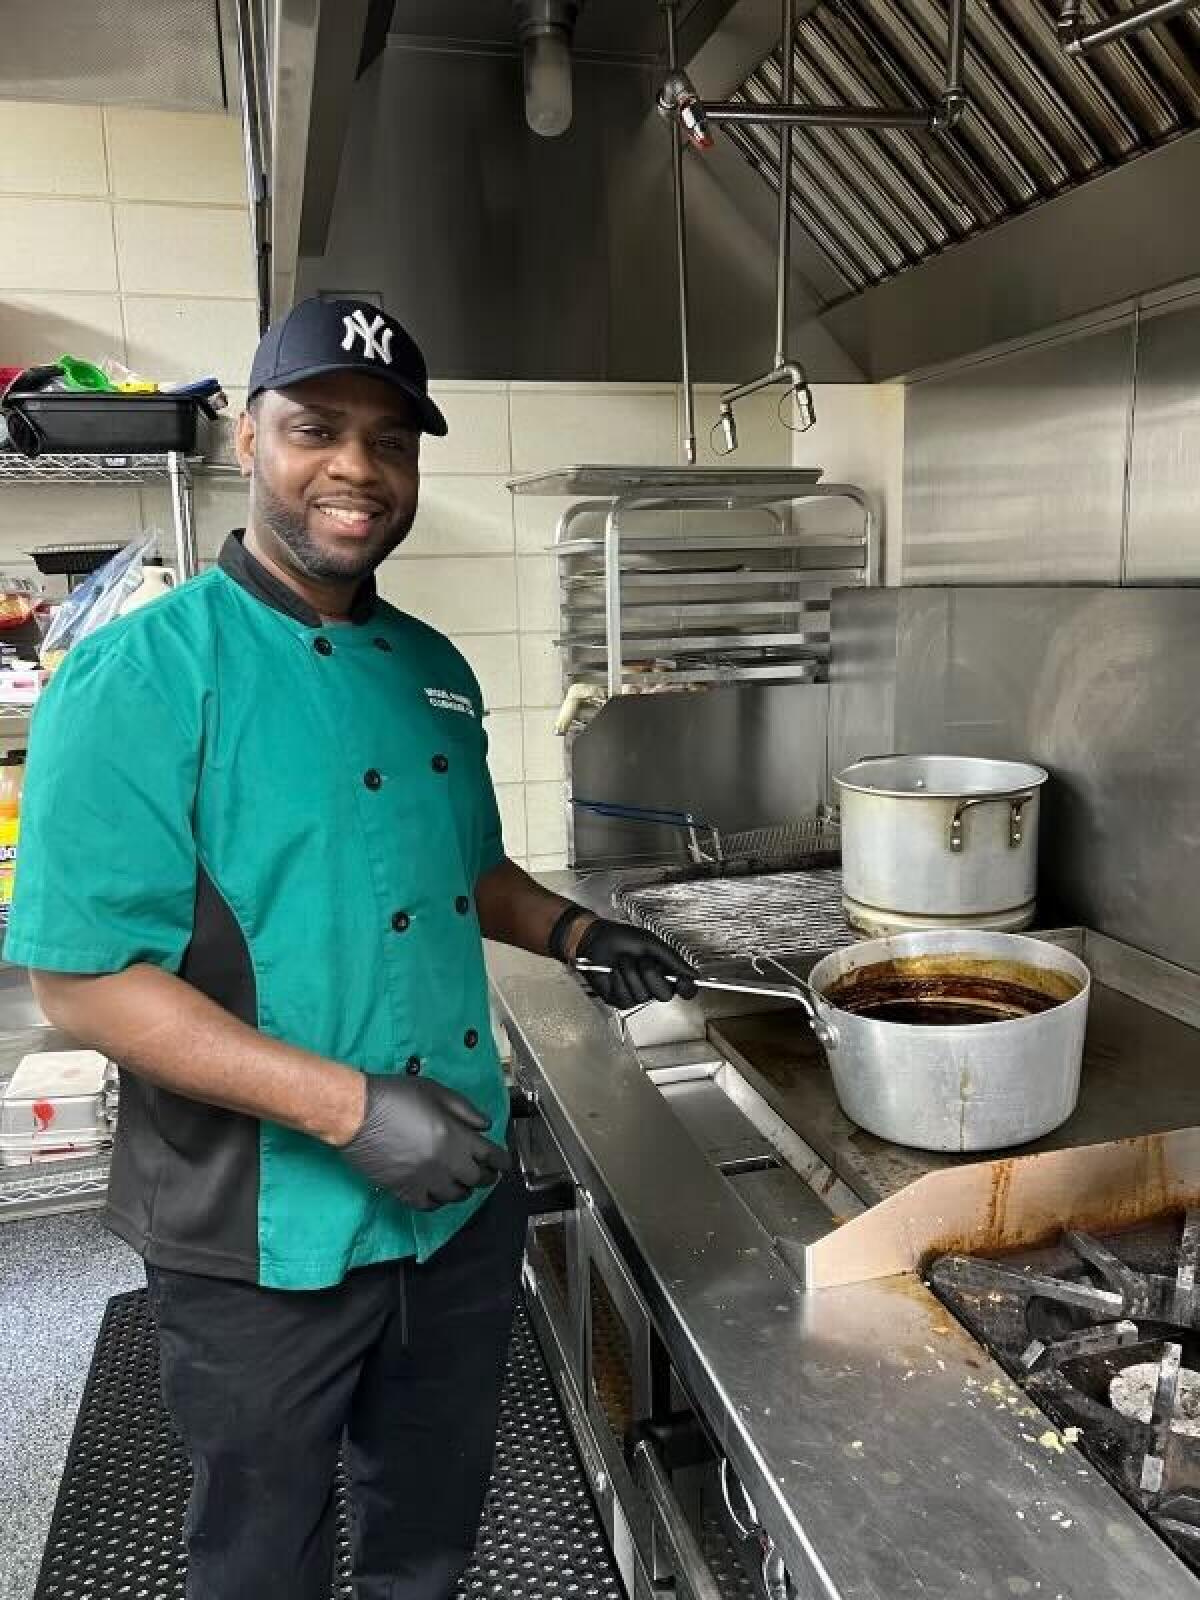 Miguel Ramirez works as the chef for the visitors' clubhouse at Yankee Stadium. Visiting teams have raved about his cooking.